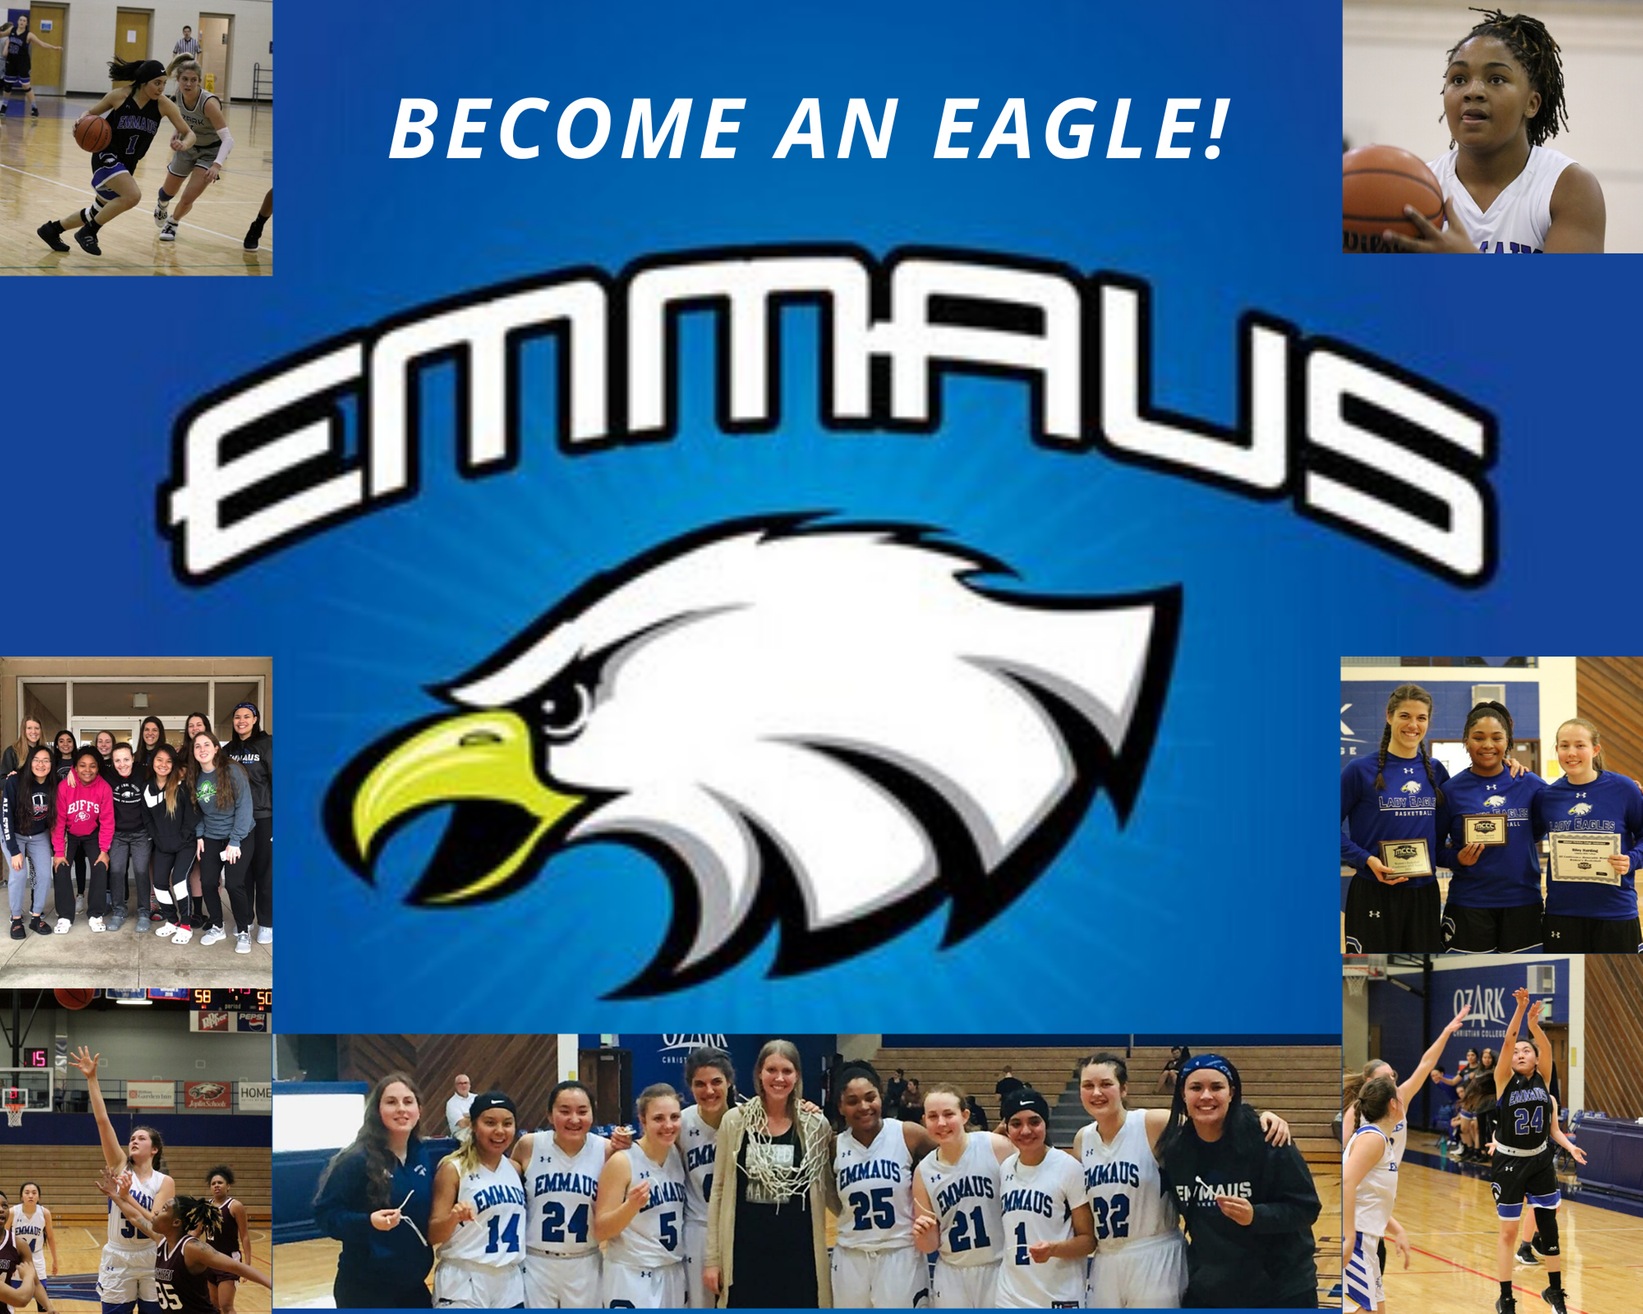 Connect With Emmaus Women's Basketball